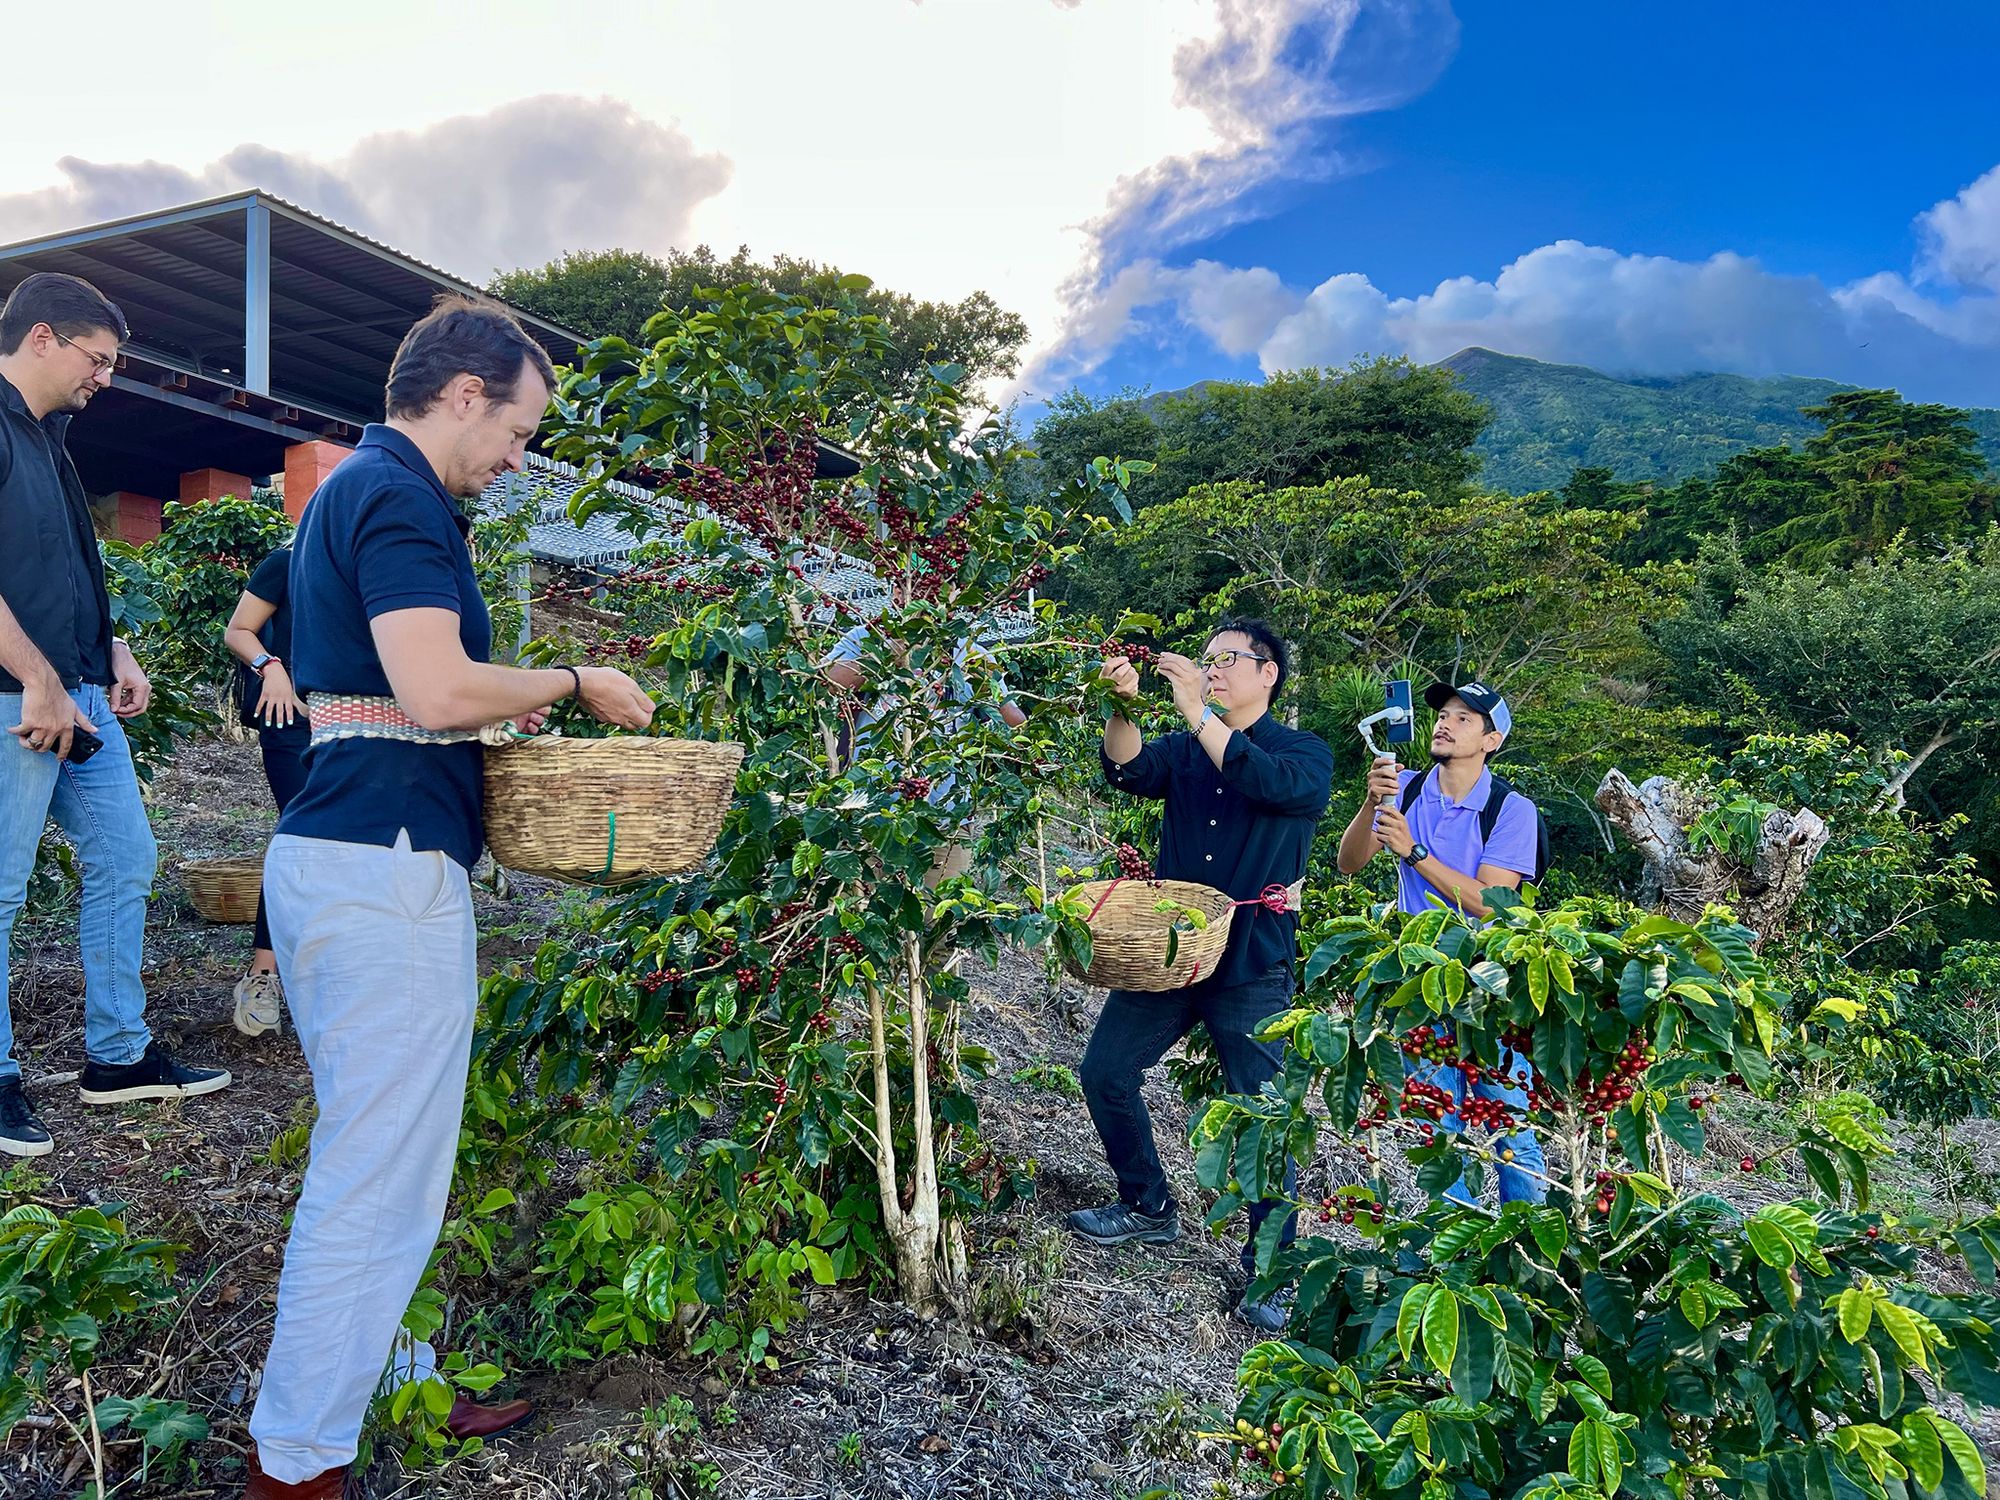 Prince Filip and Samson Mow picking coffee beans at Cráter Coffee